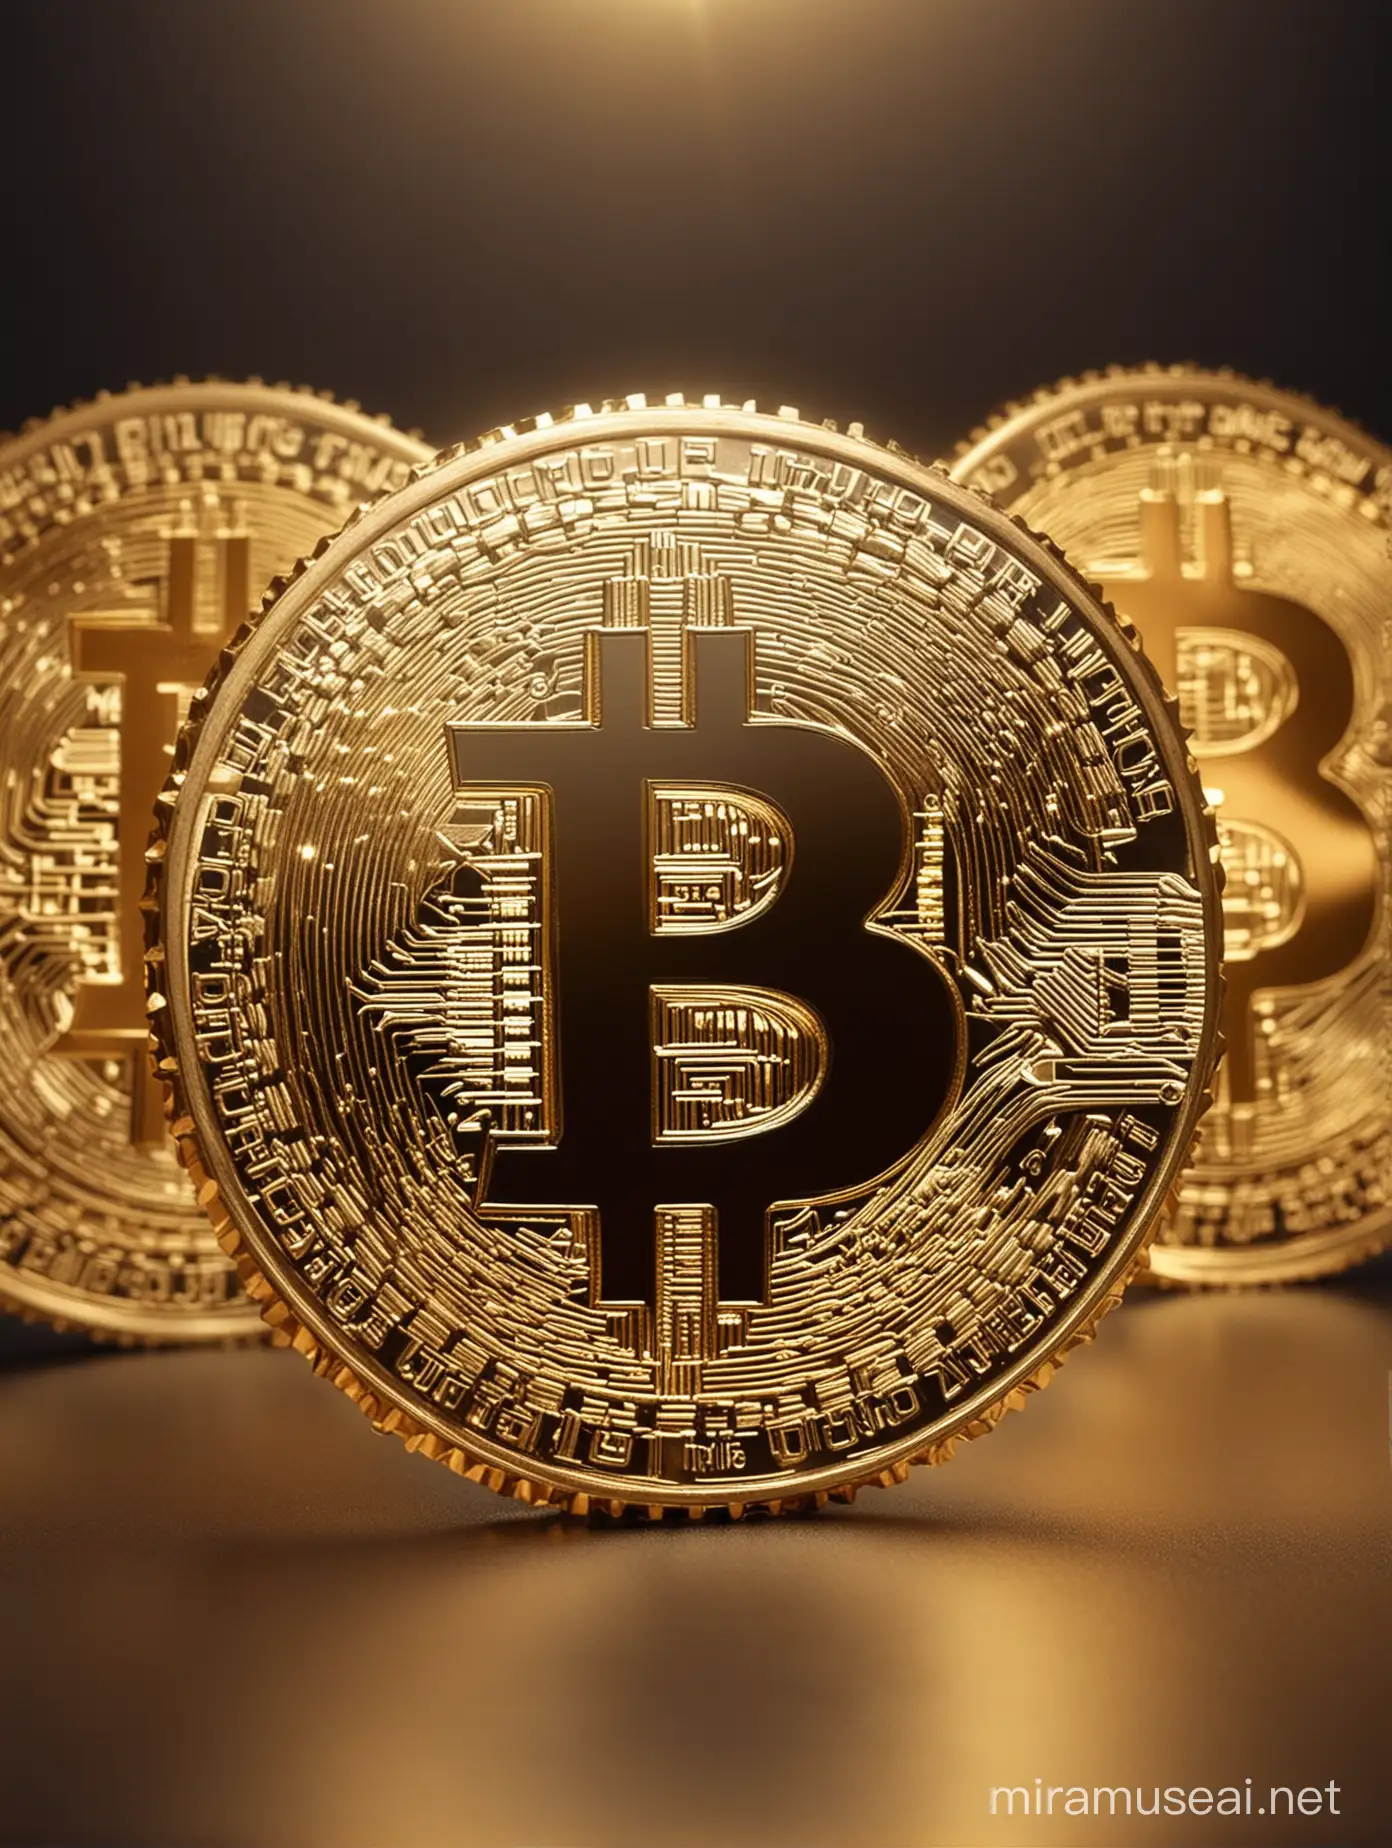 Gleaming Golden Bitcoin Symbolizes Wealth and Prosperity